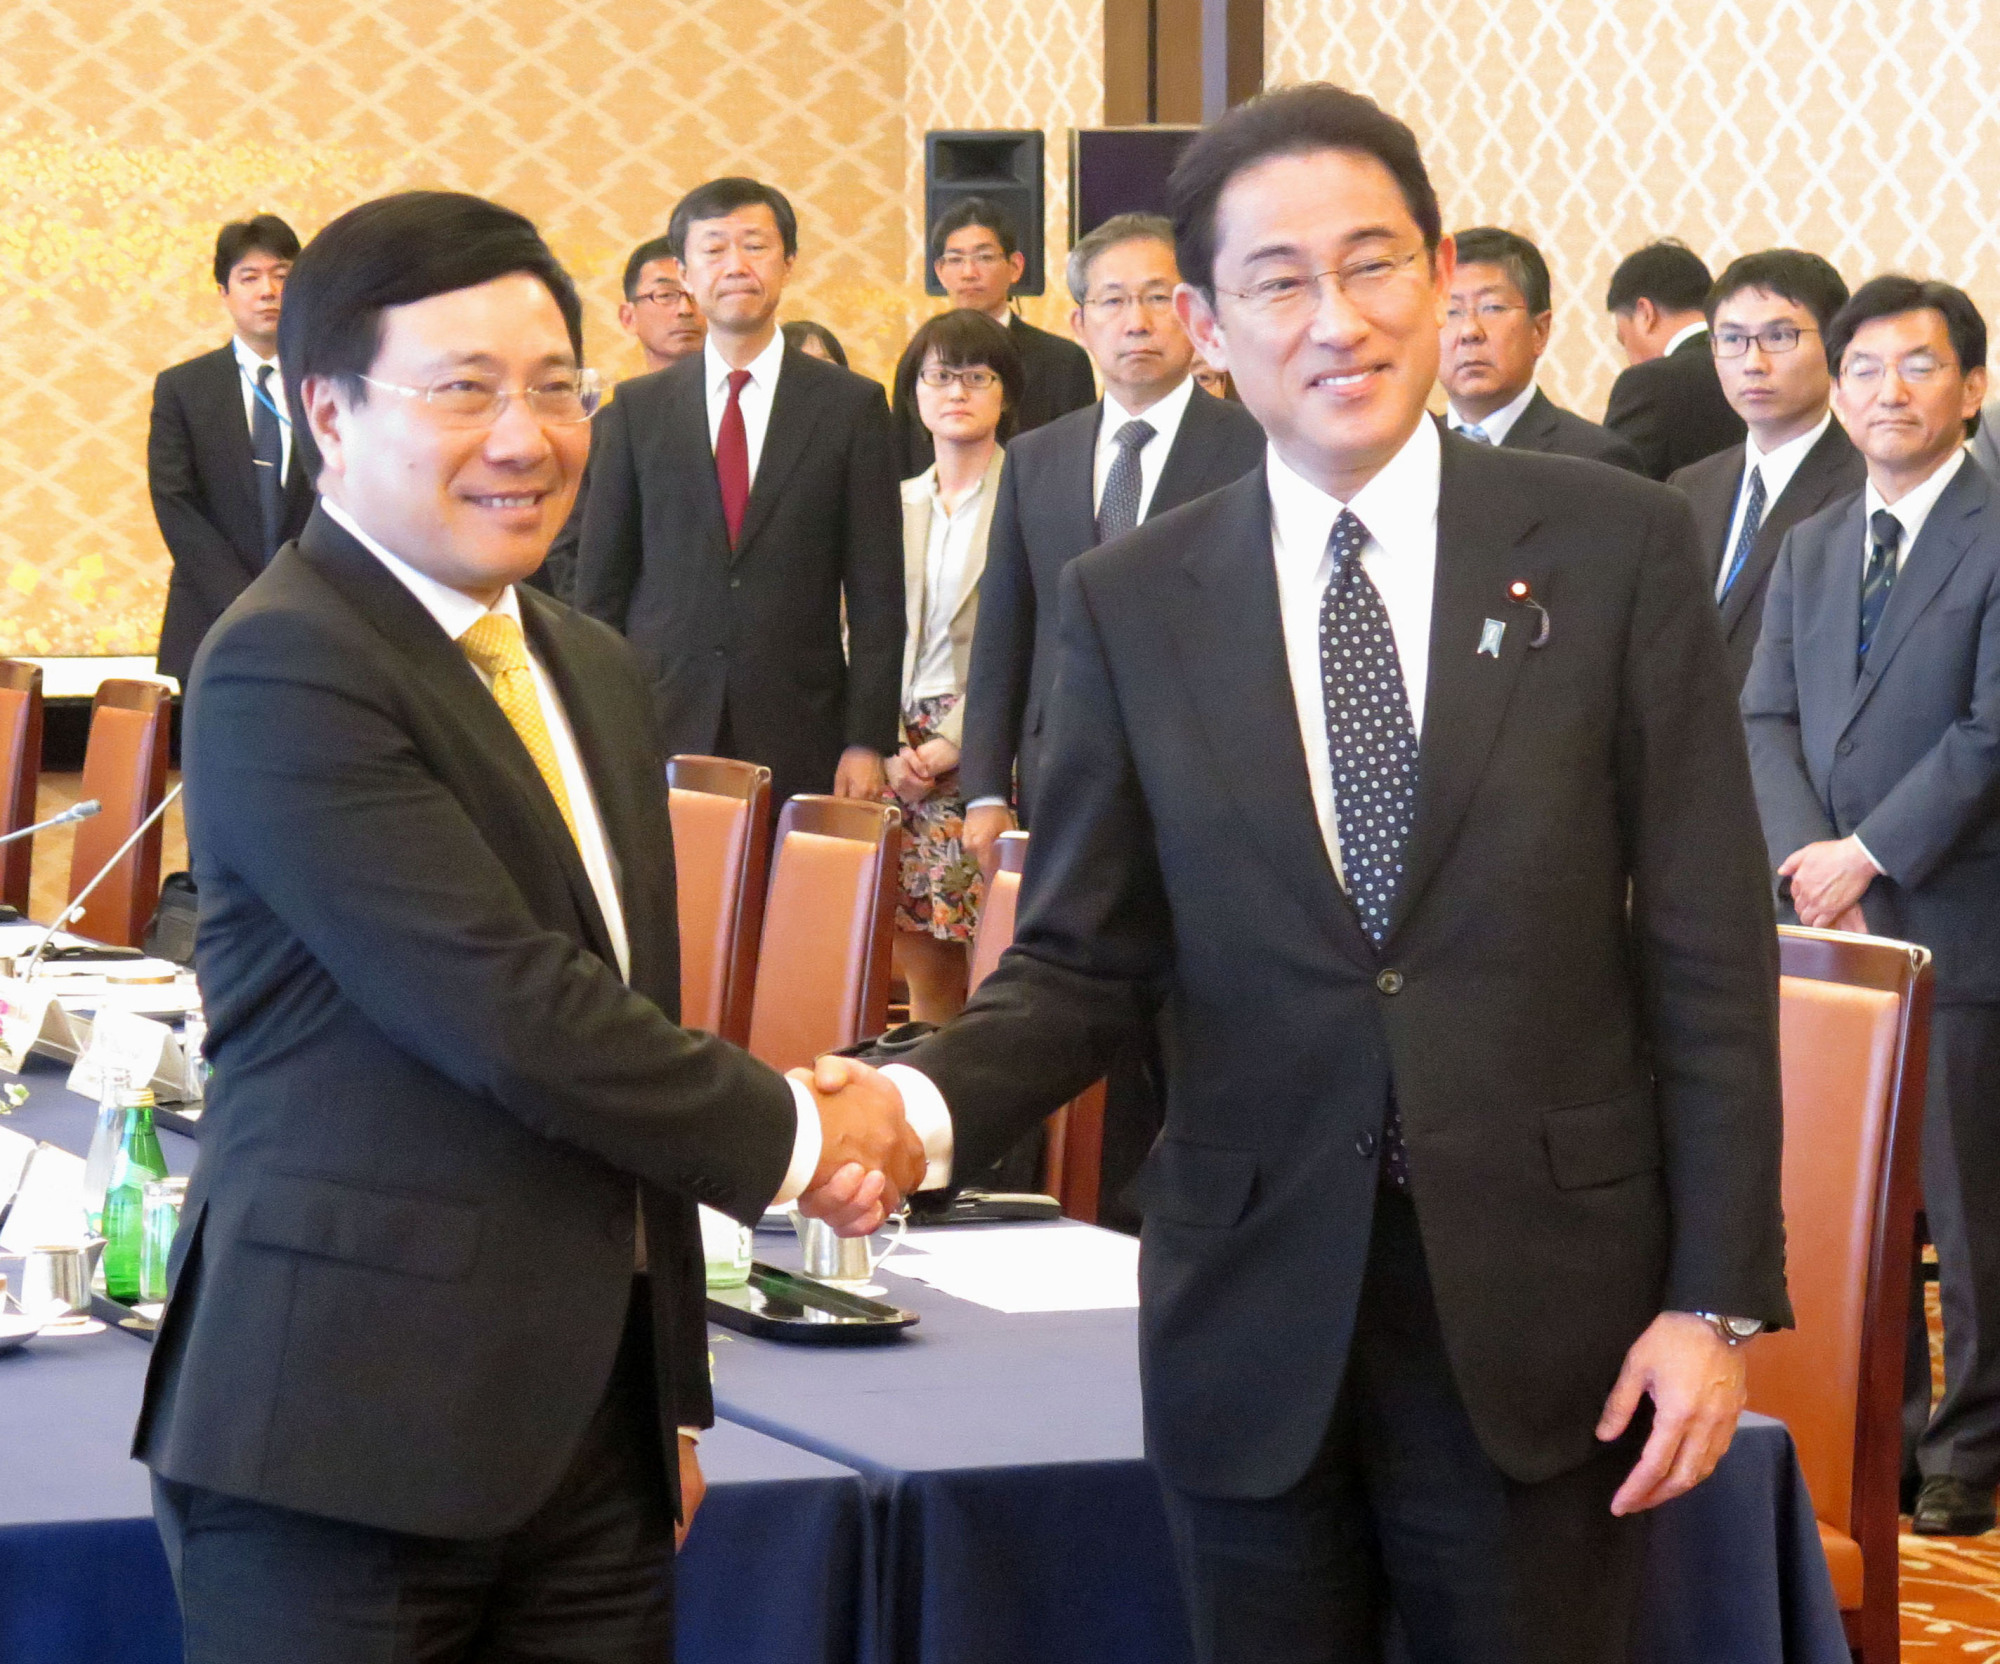 Vietnamese Deputy Prime Minister Pham Binh Minh (left) is greeted by Foreign Minister Fumio Kishida ahead of their talks in Tokyo on Monday. | KYODO